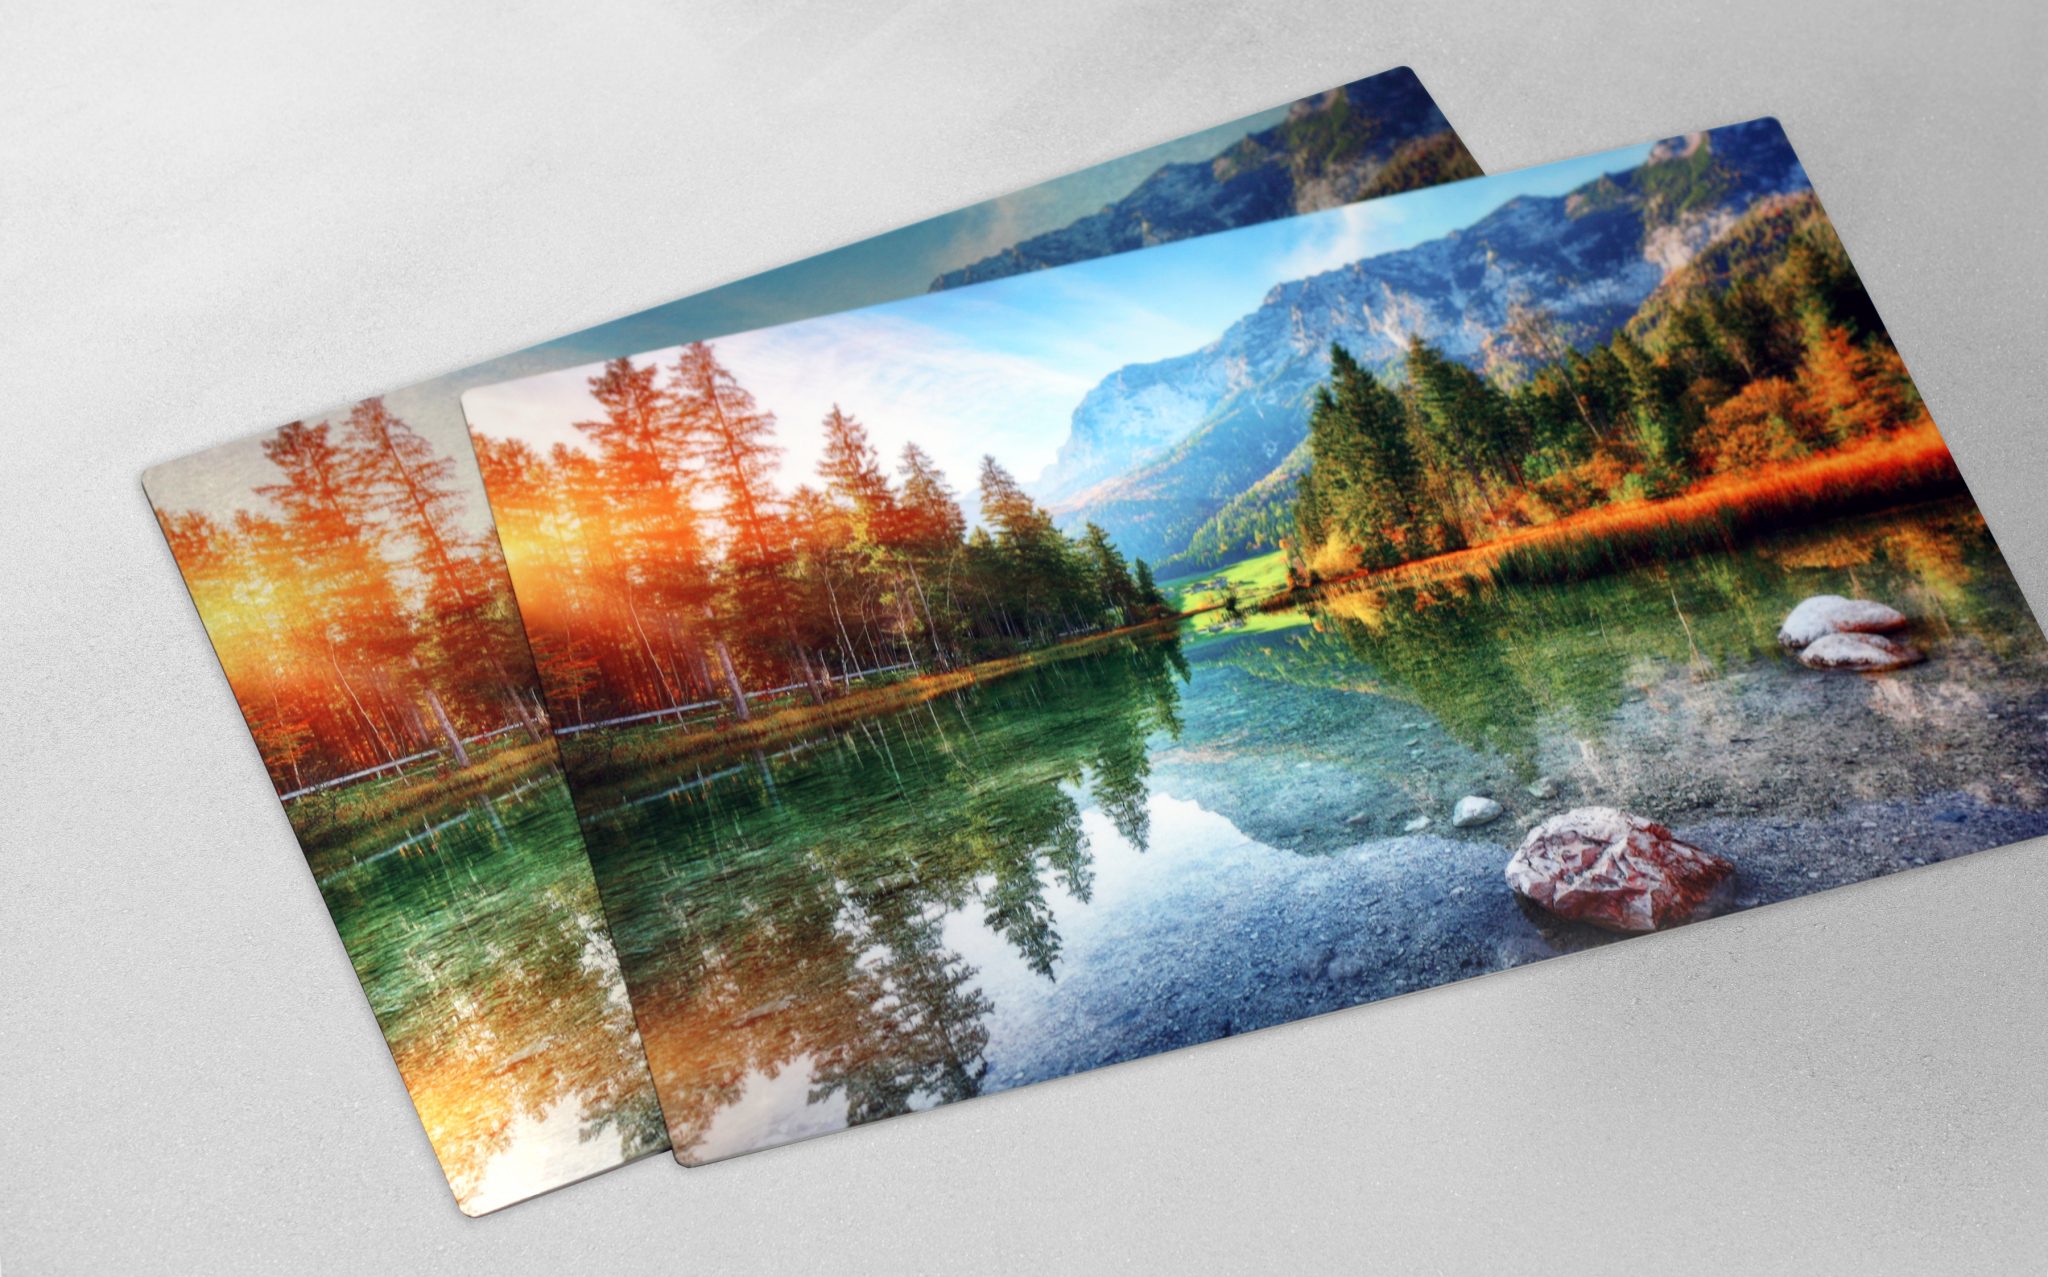 Landscape printed on metal prints showing finishes